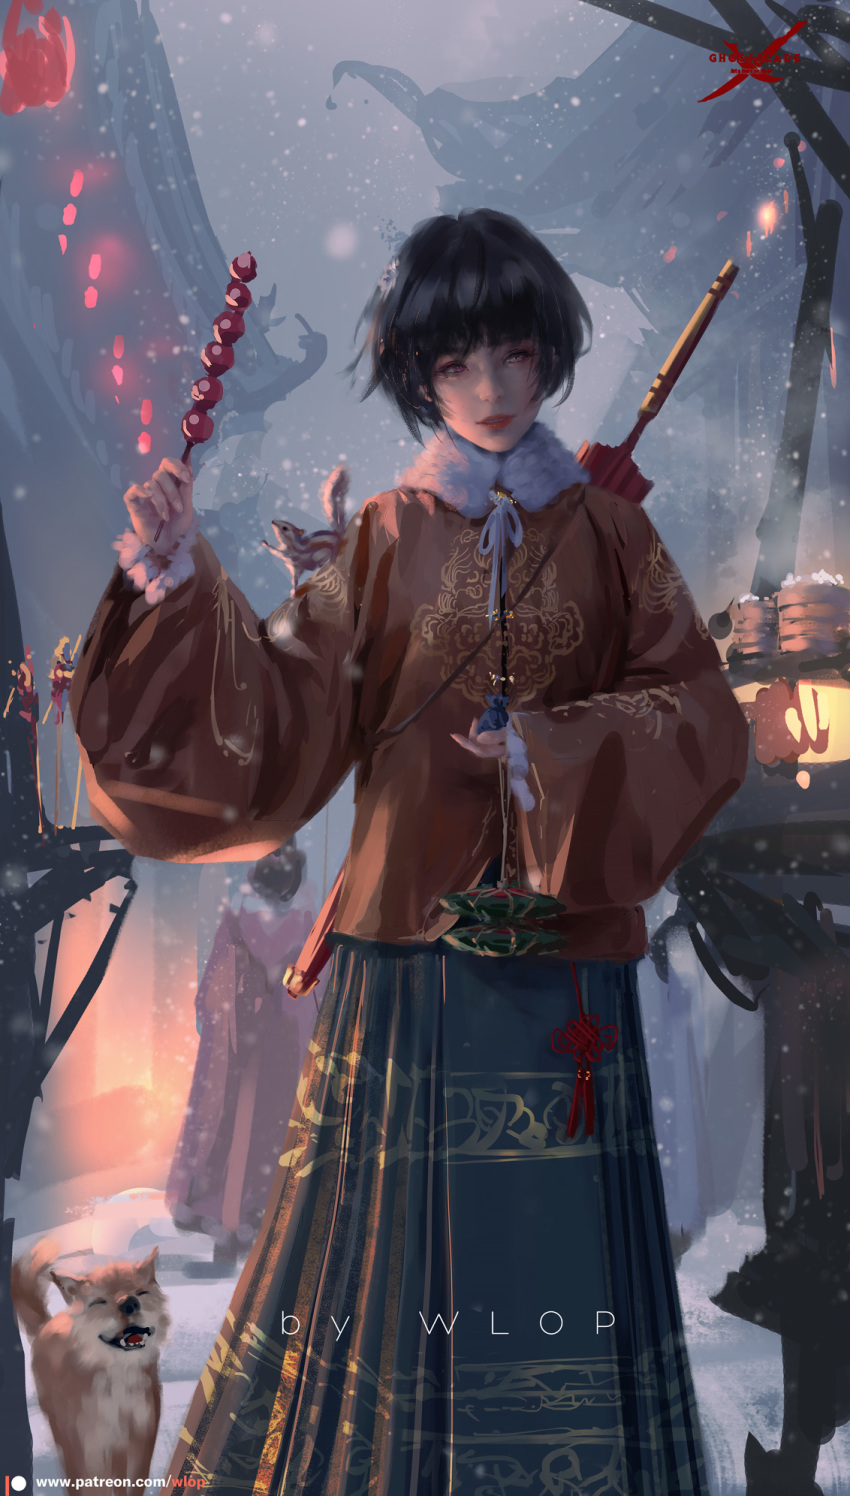 1girl 1other architecture bangs black_hair blunt_bangs brown_eyes building chipmunk dog east_asian_architecture facing_viewer fur_collar ghostblade highres lips long_skirt short_hair skirt solo_focus squirrel wlop